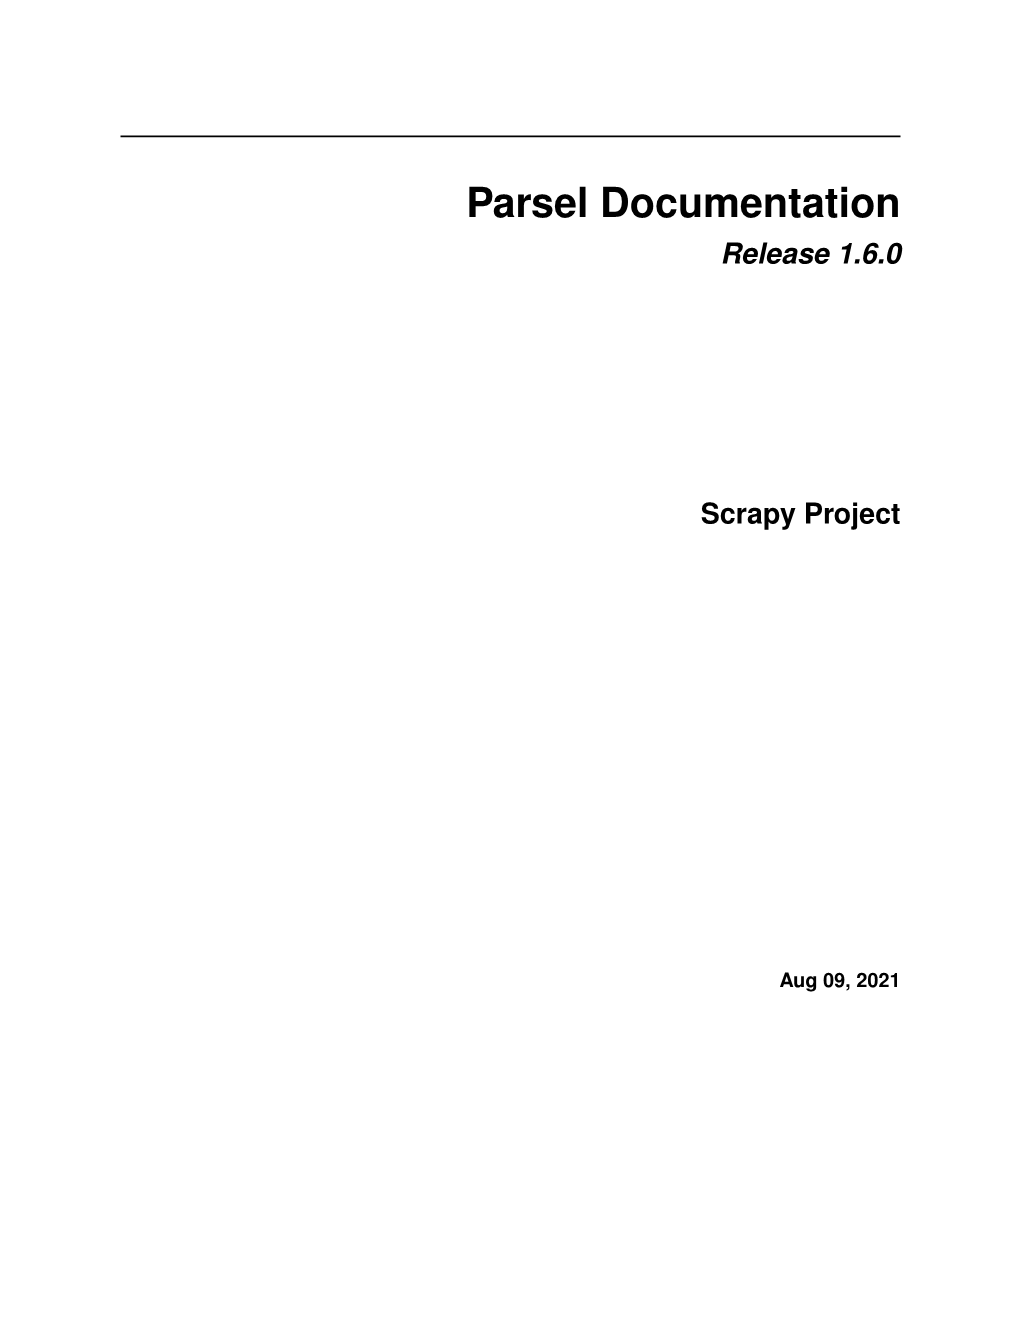 Parsel Documentation Release 1.6.0